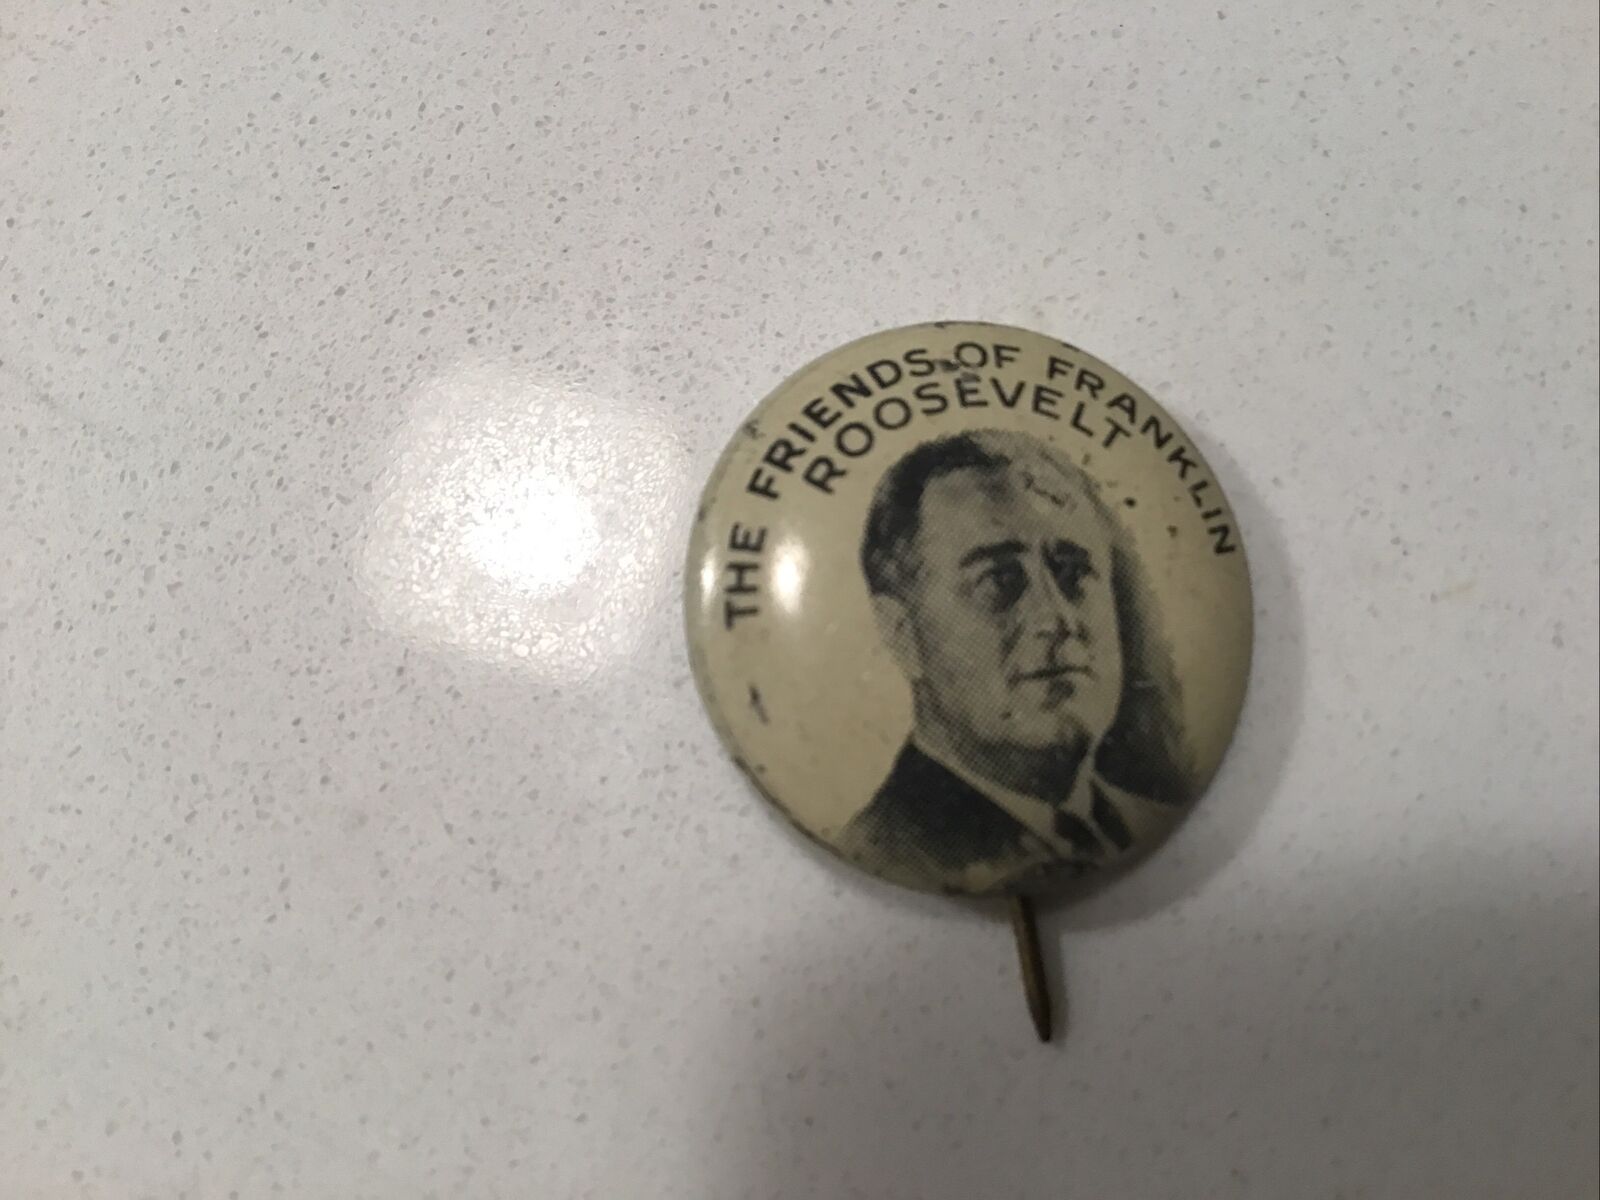 1936 Franklin D. Roosevelt FRIENDS OF FDR campaign pin pinback button president